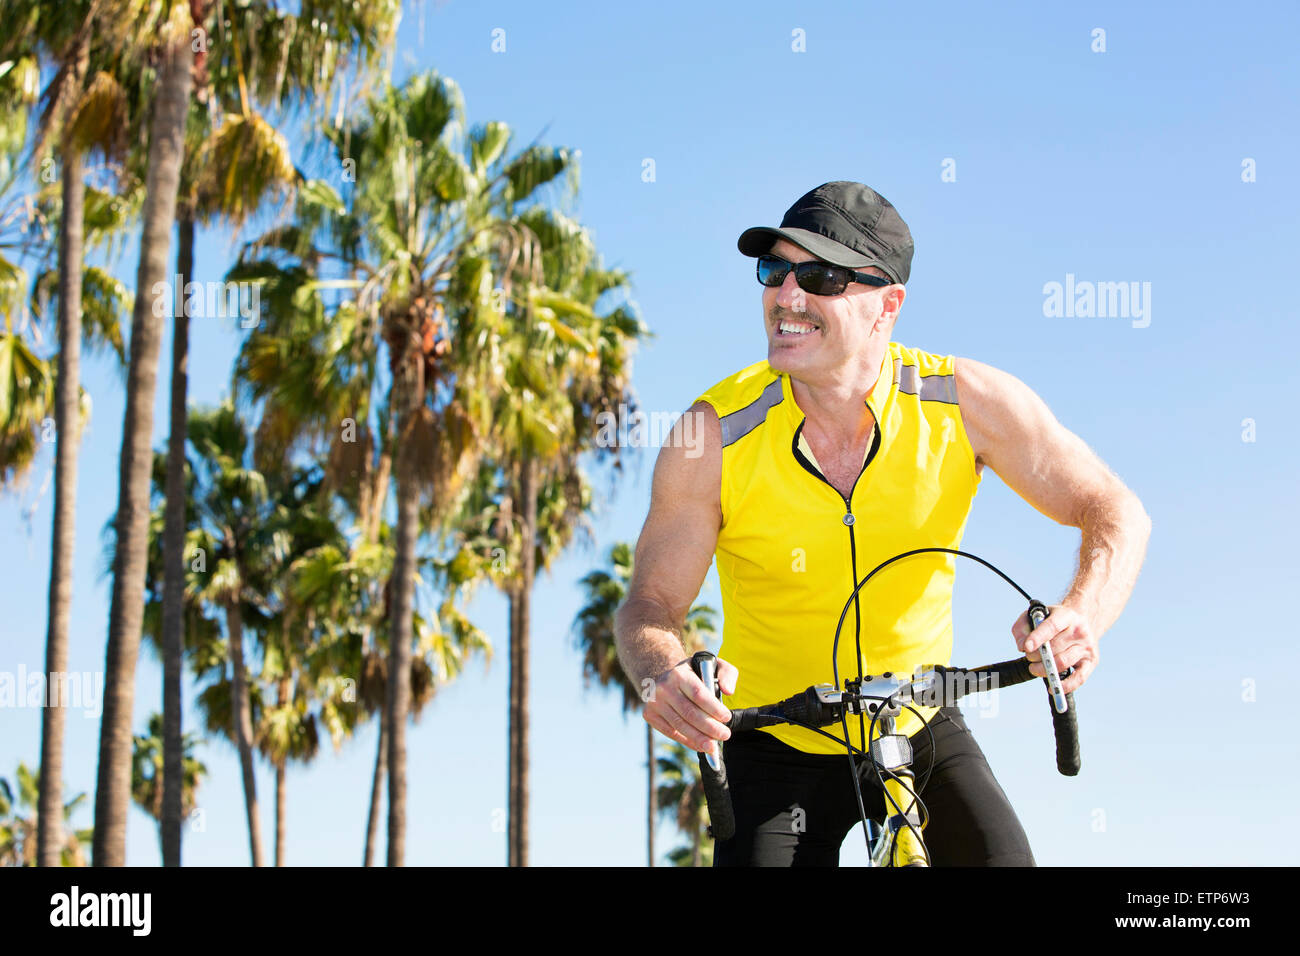 man on his bicycle in front of palm trees Stock Photo